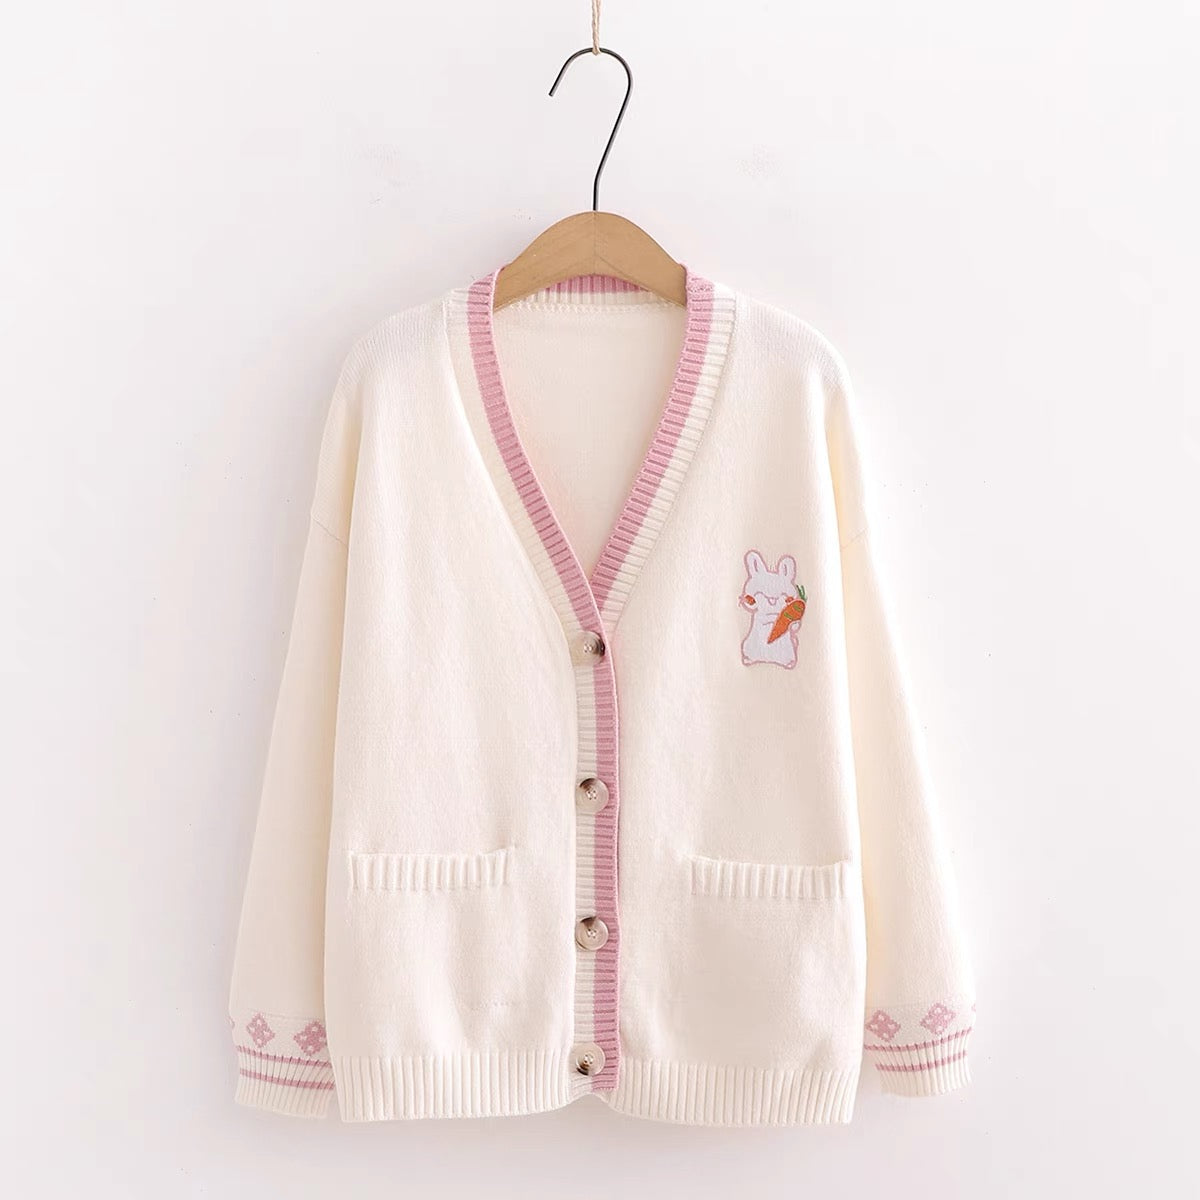 Bunny and Carrot Embroidery Sweater Cardigan